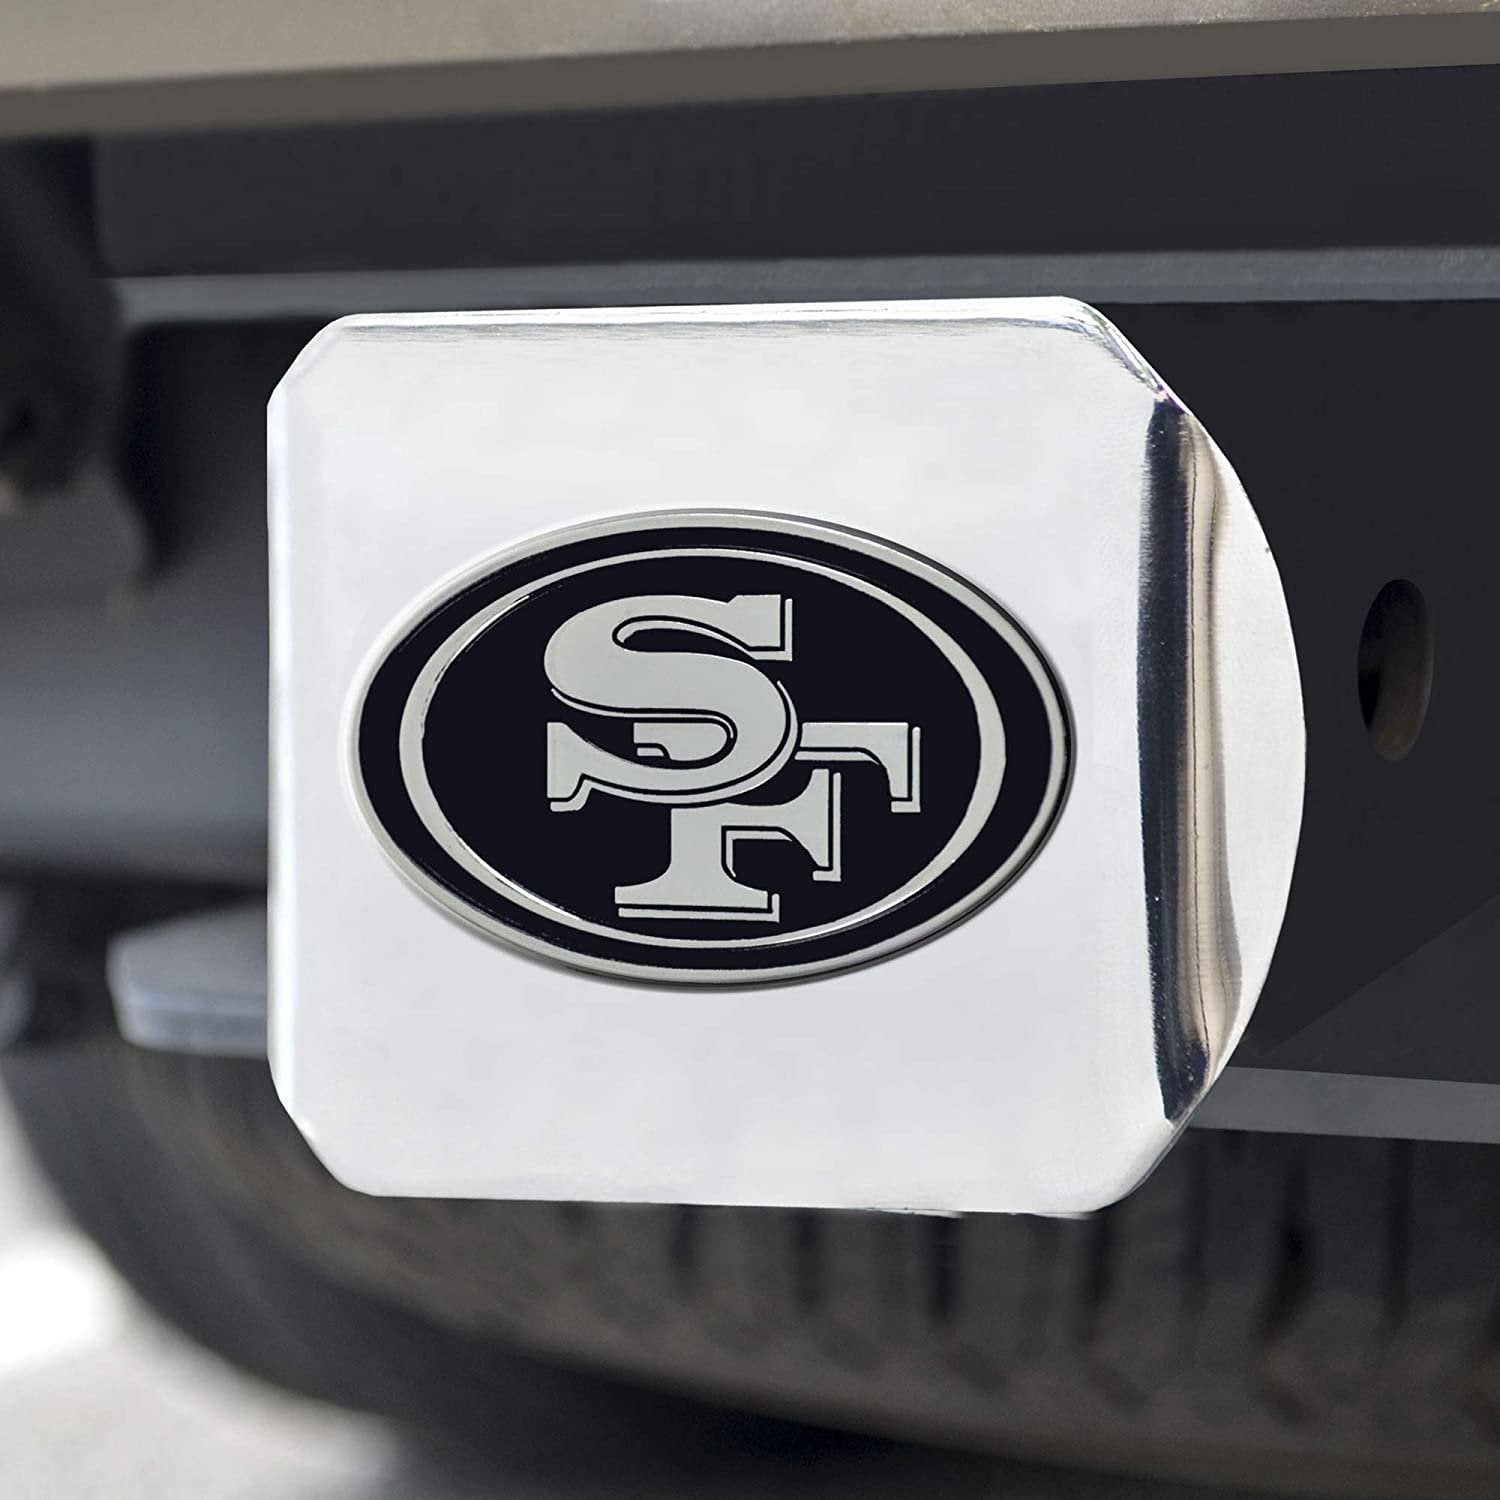 San Francisco 49ers Solid Metal Hitch Cover with Chrome Metal Emblem 2 Inch Square Type III